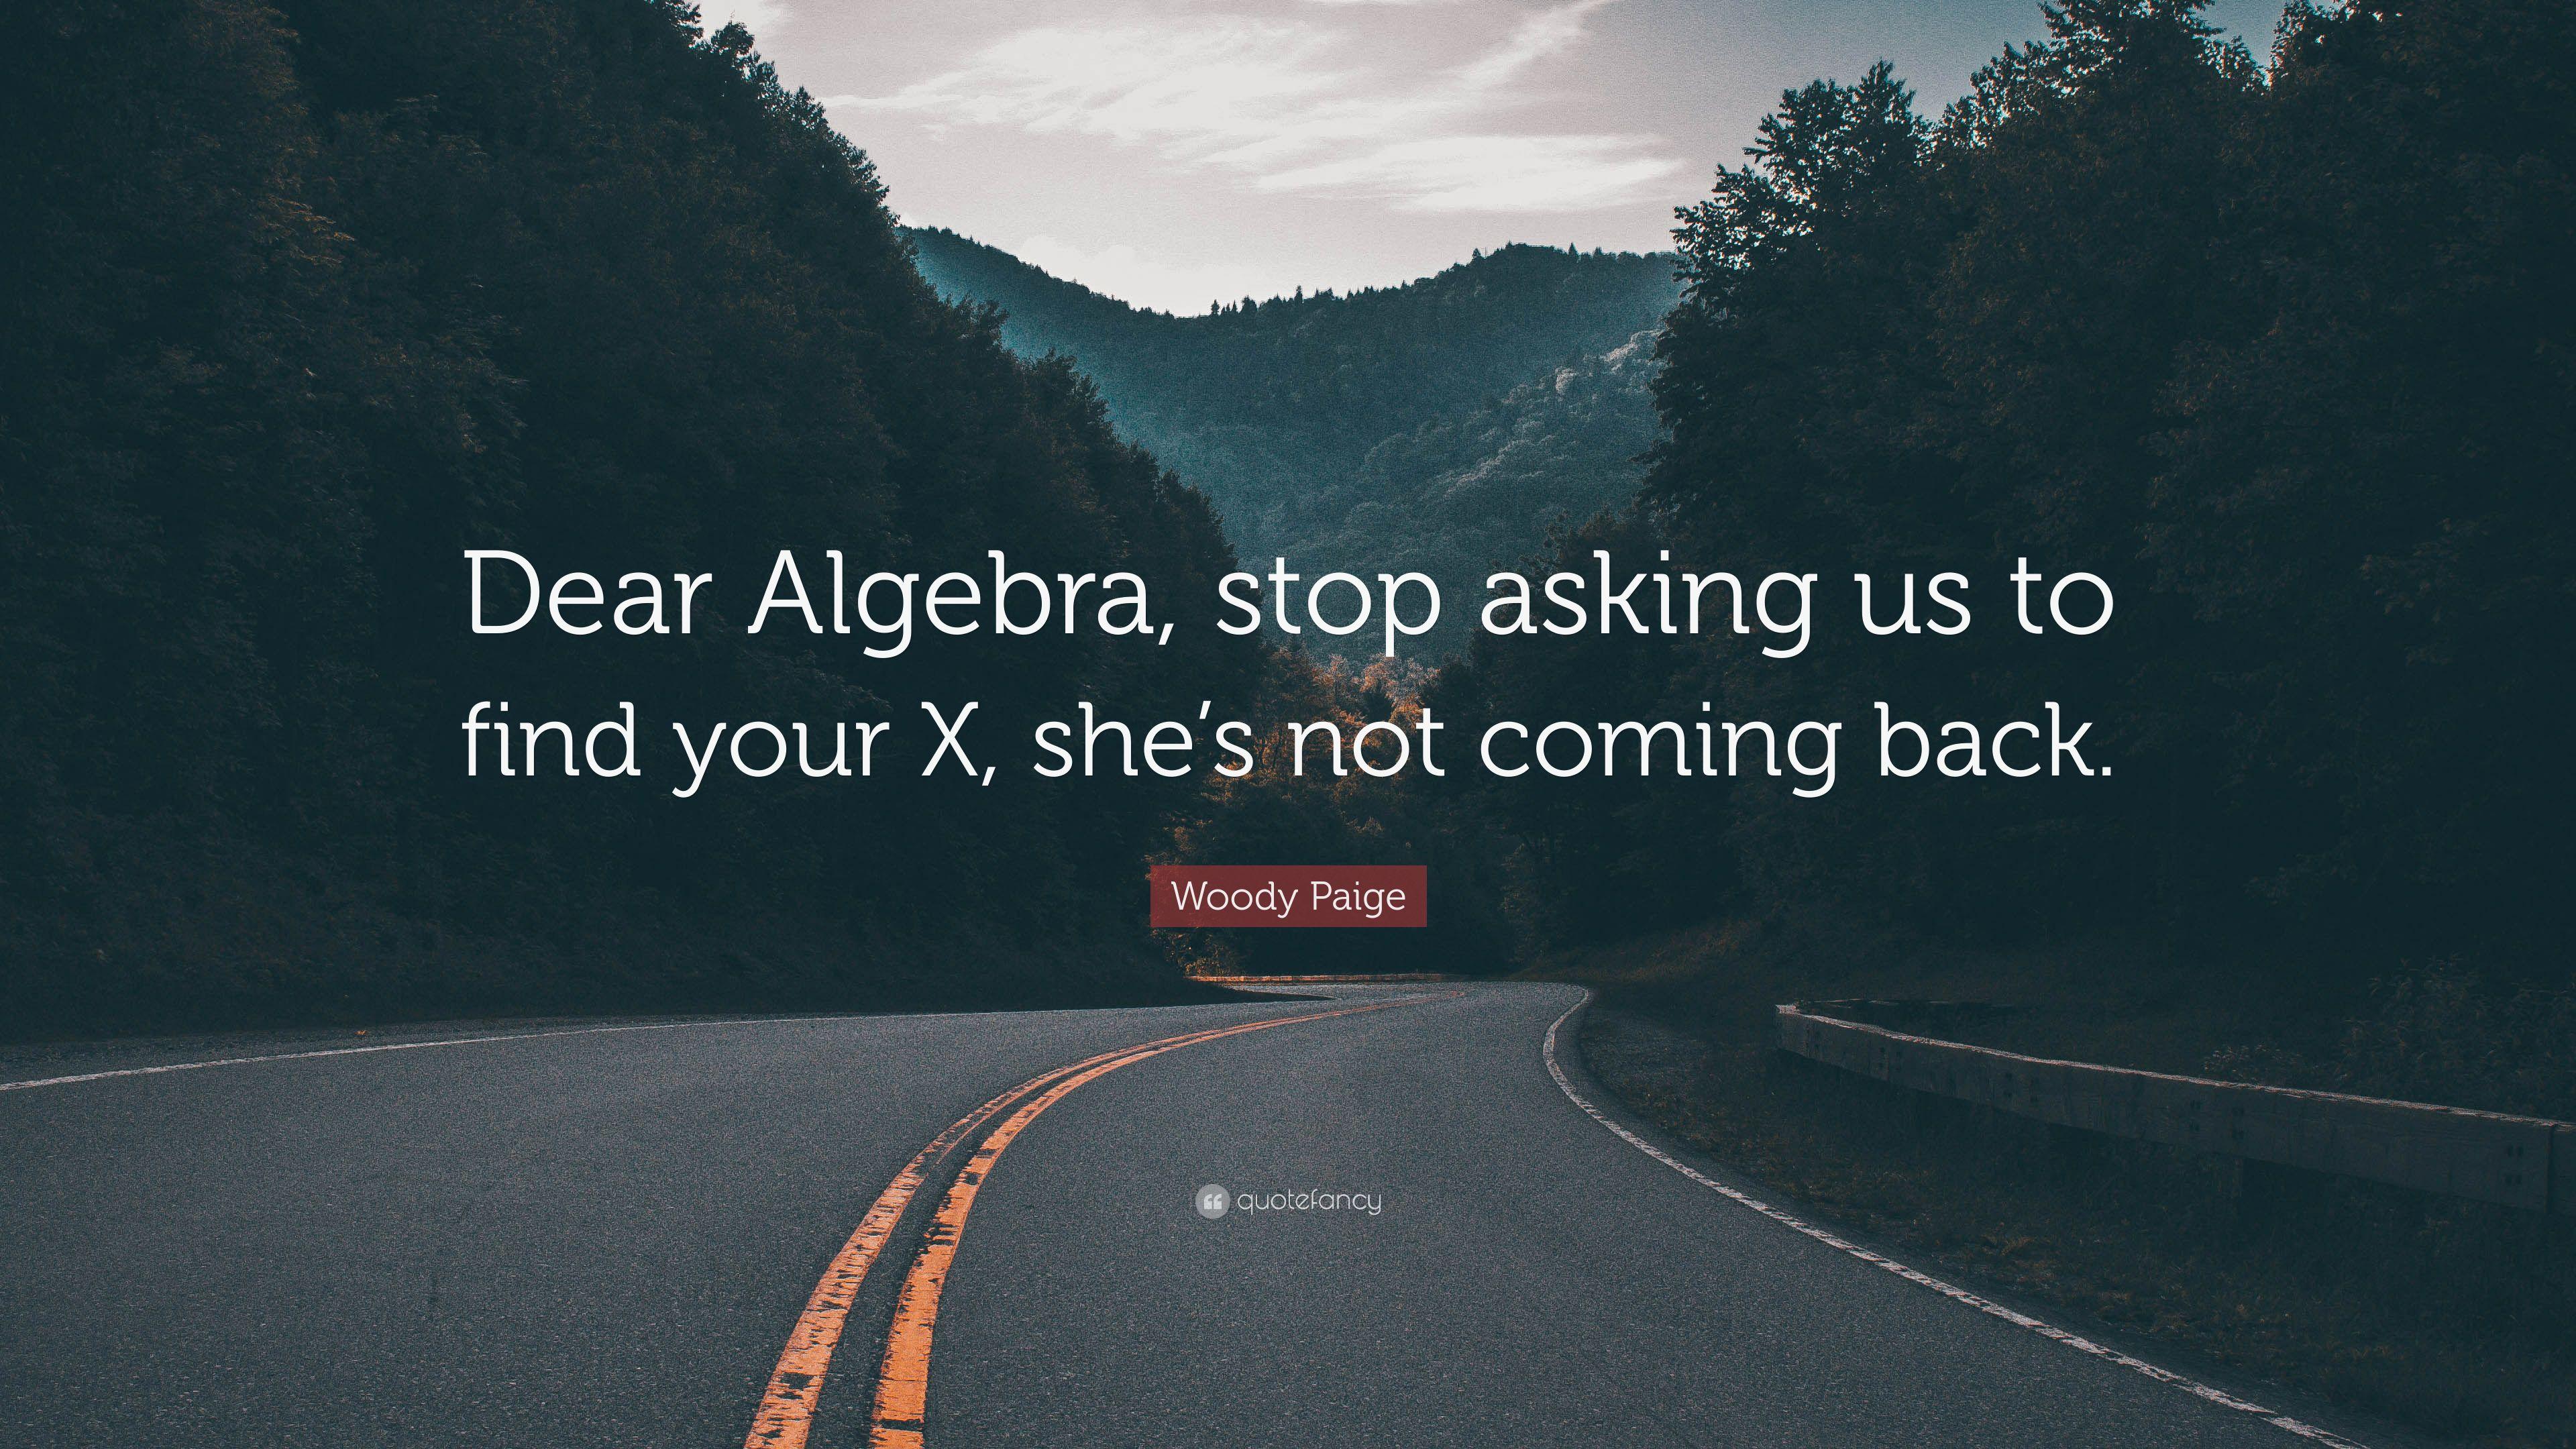 Woody Paige Quote: “Dear Algebra, stop asking us to find your X